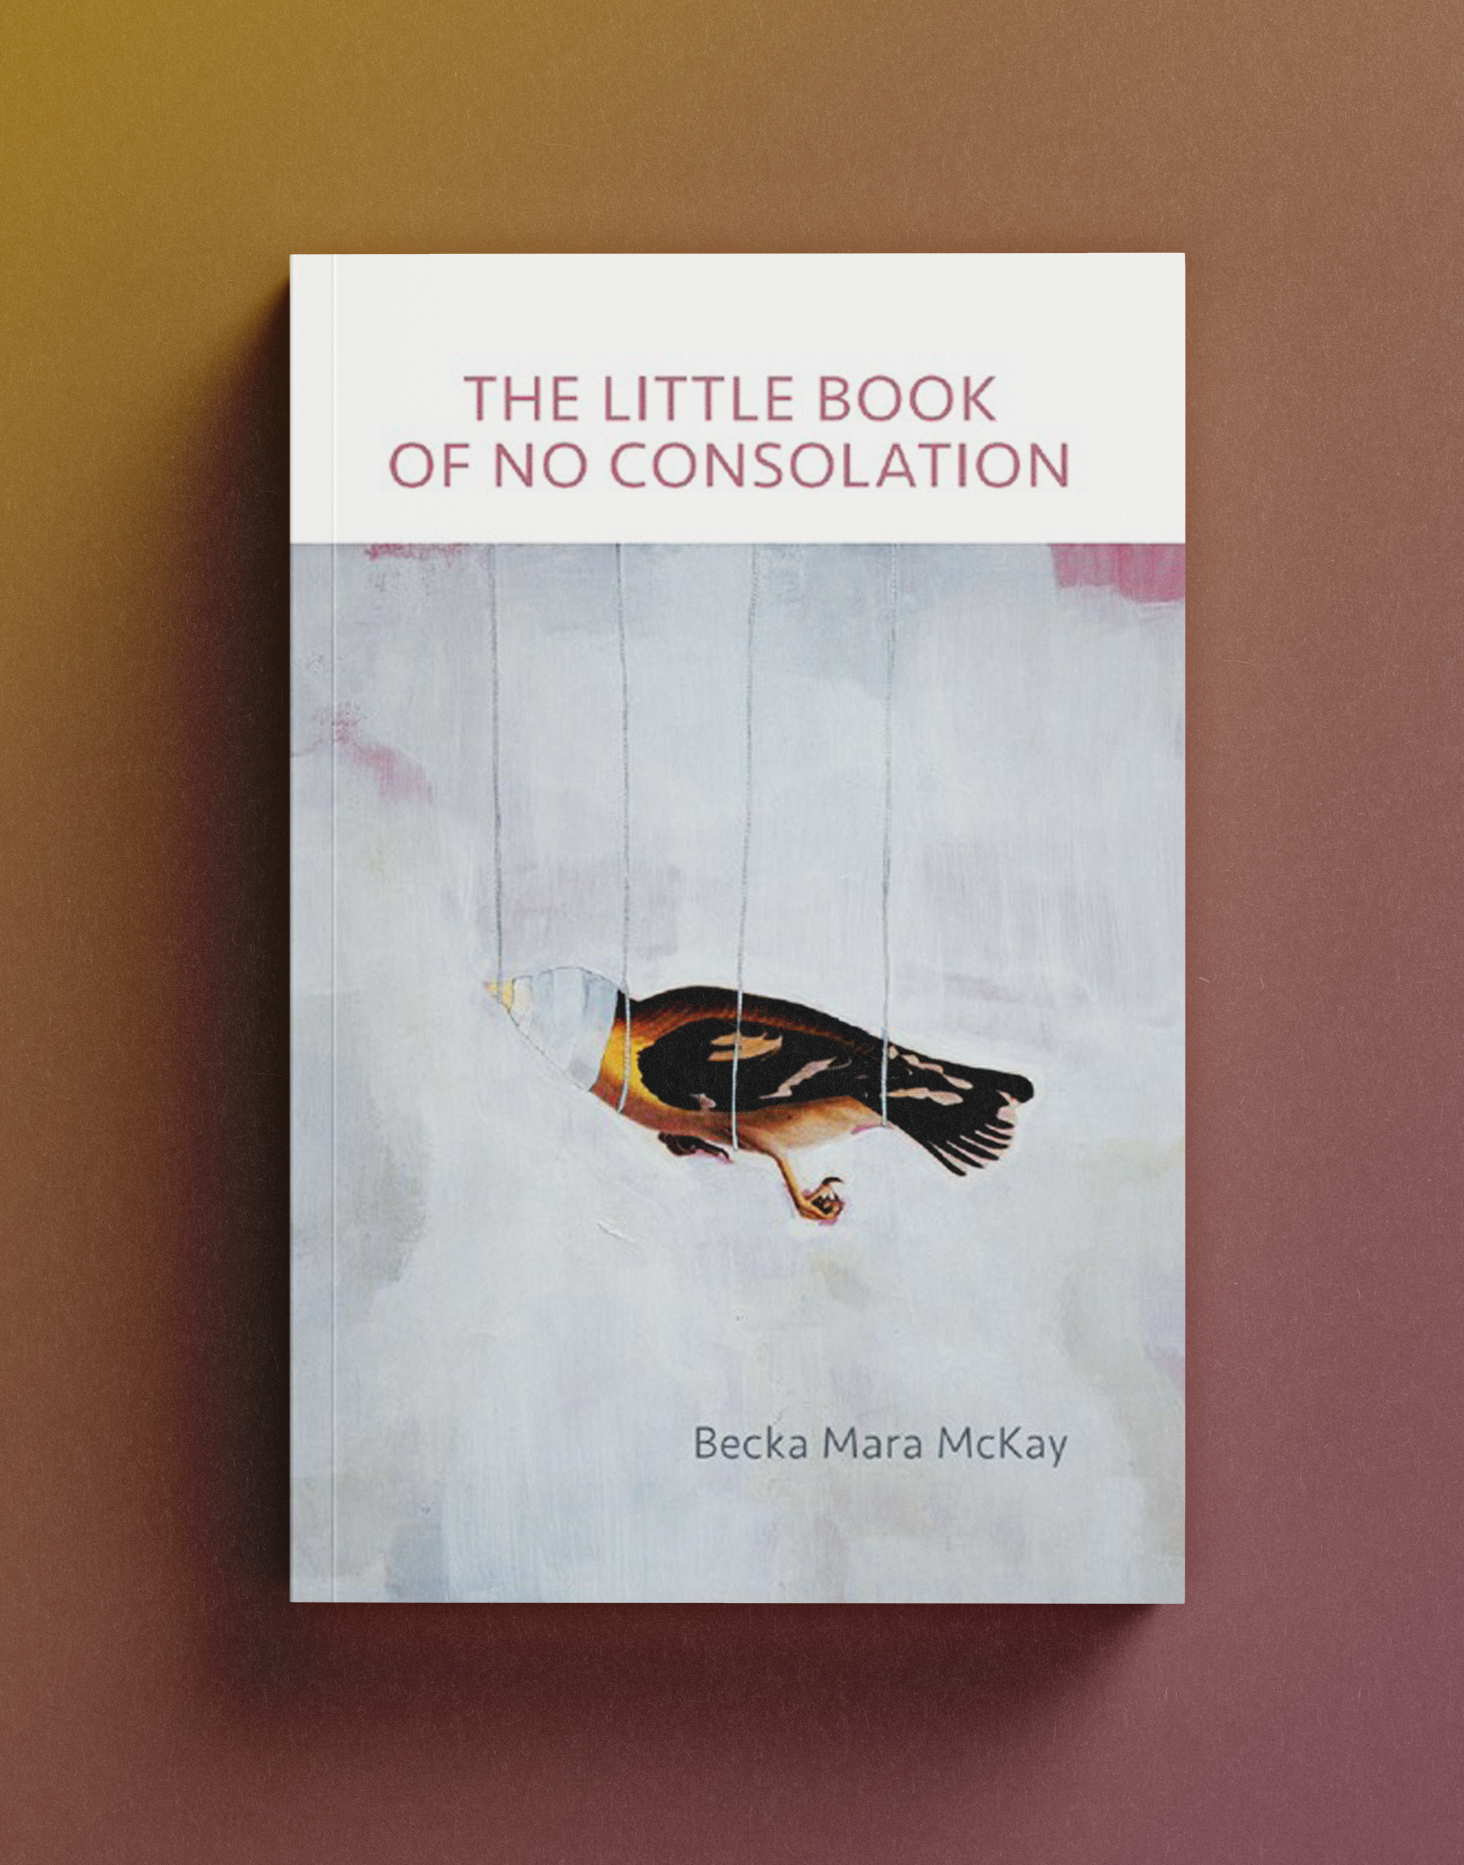 McKay's The Little Book of No Consolation